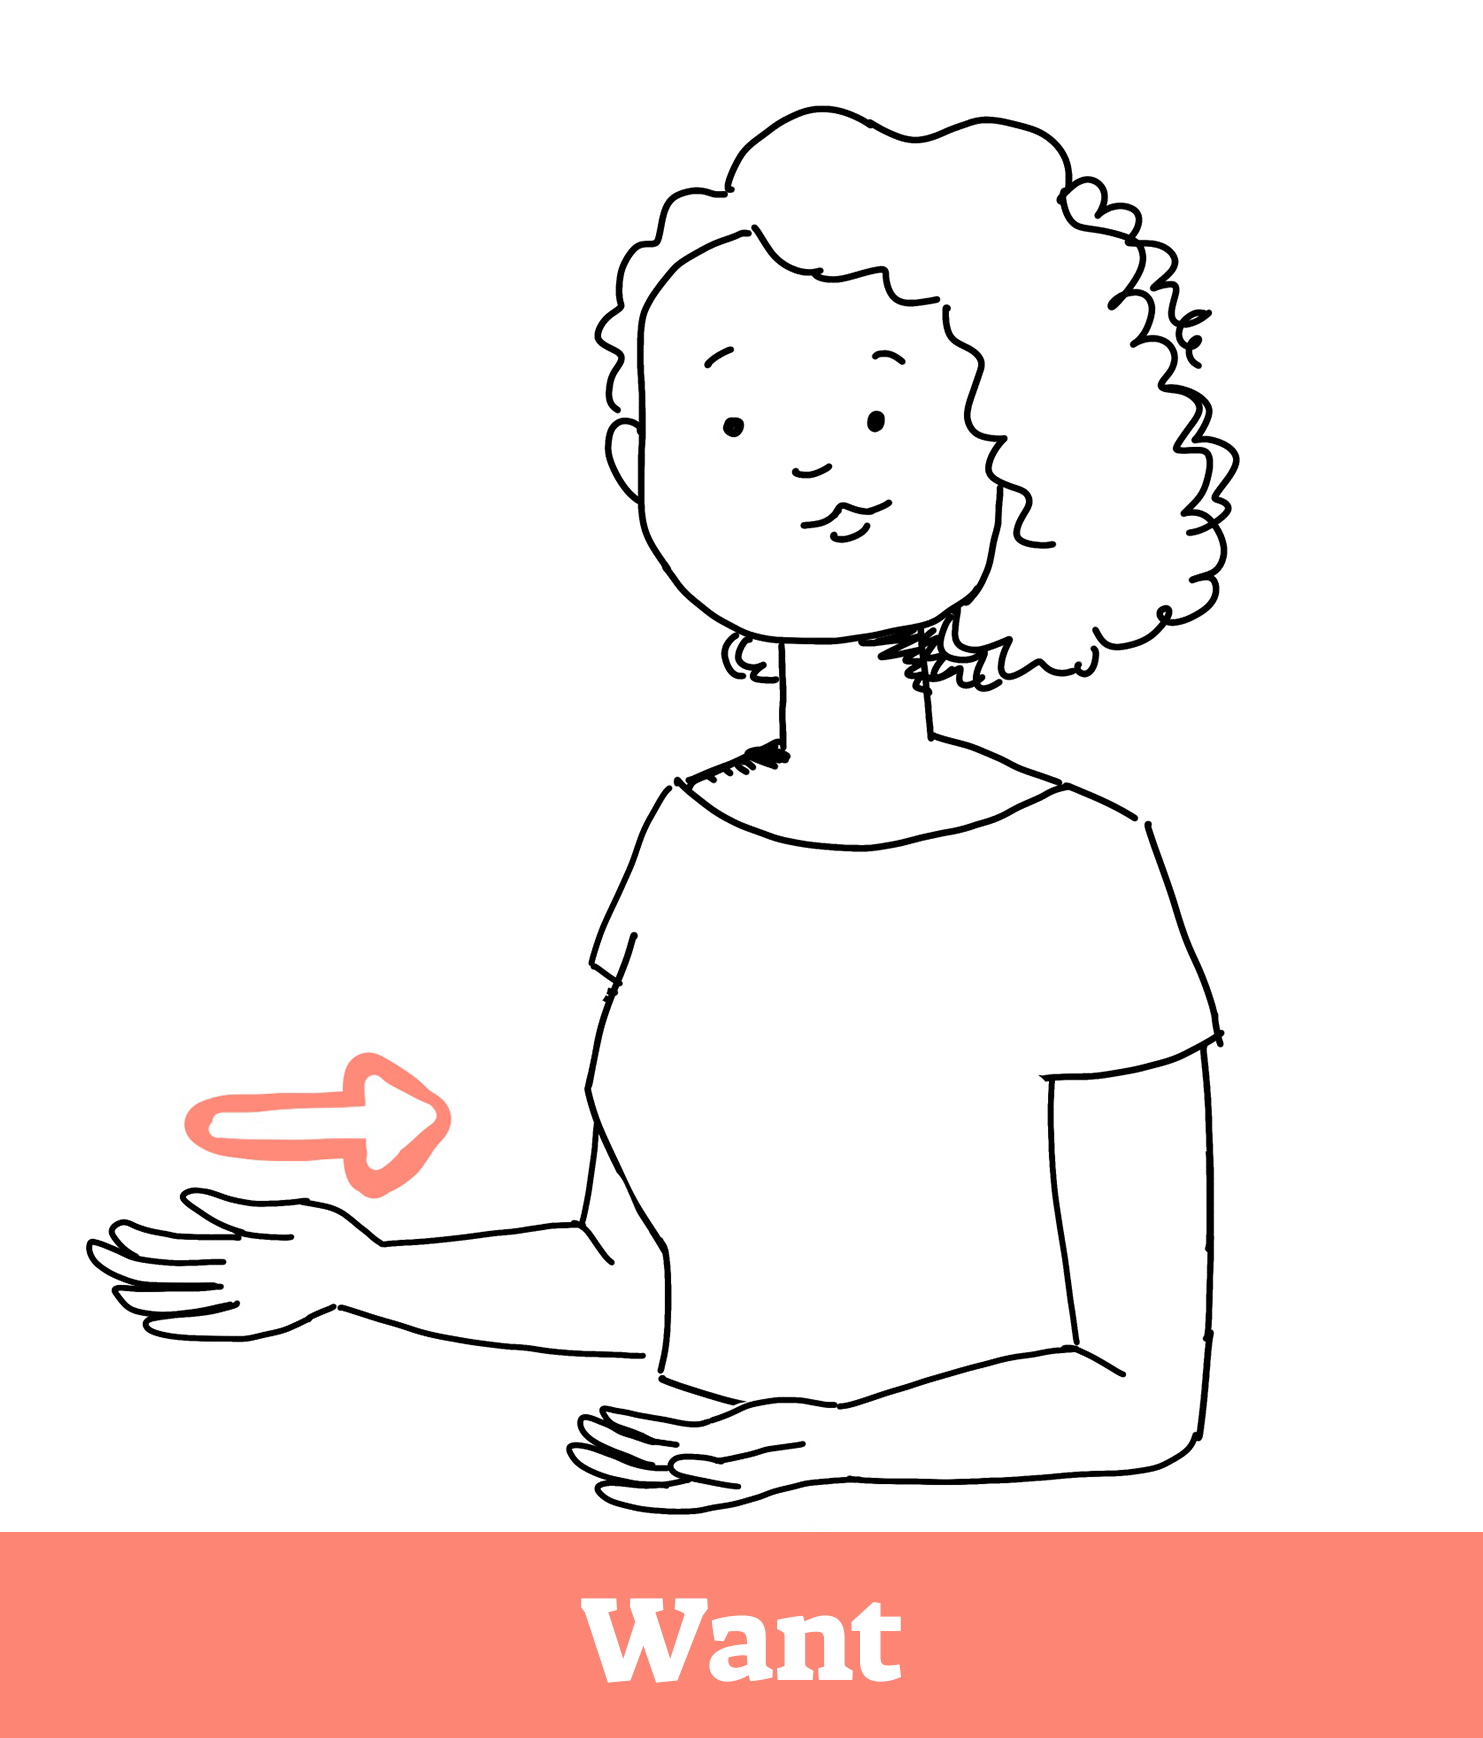 Animation of baby sign language sign for the word "want".